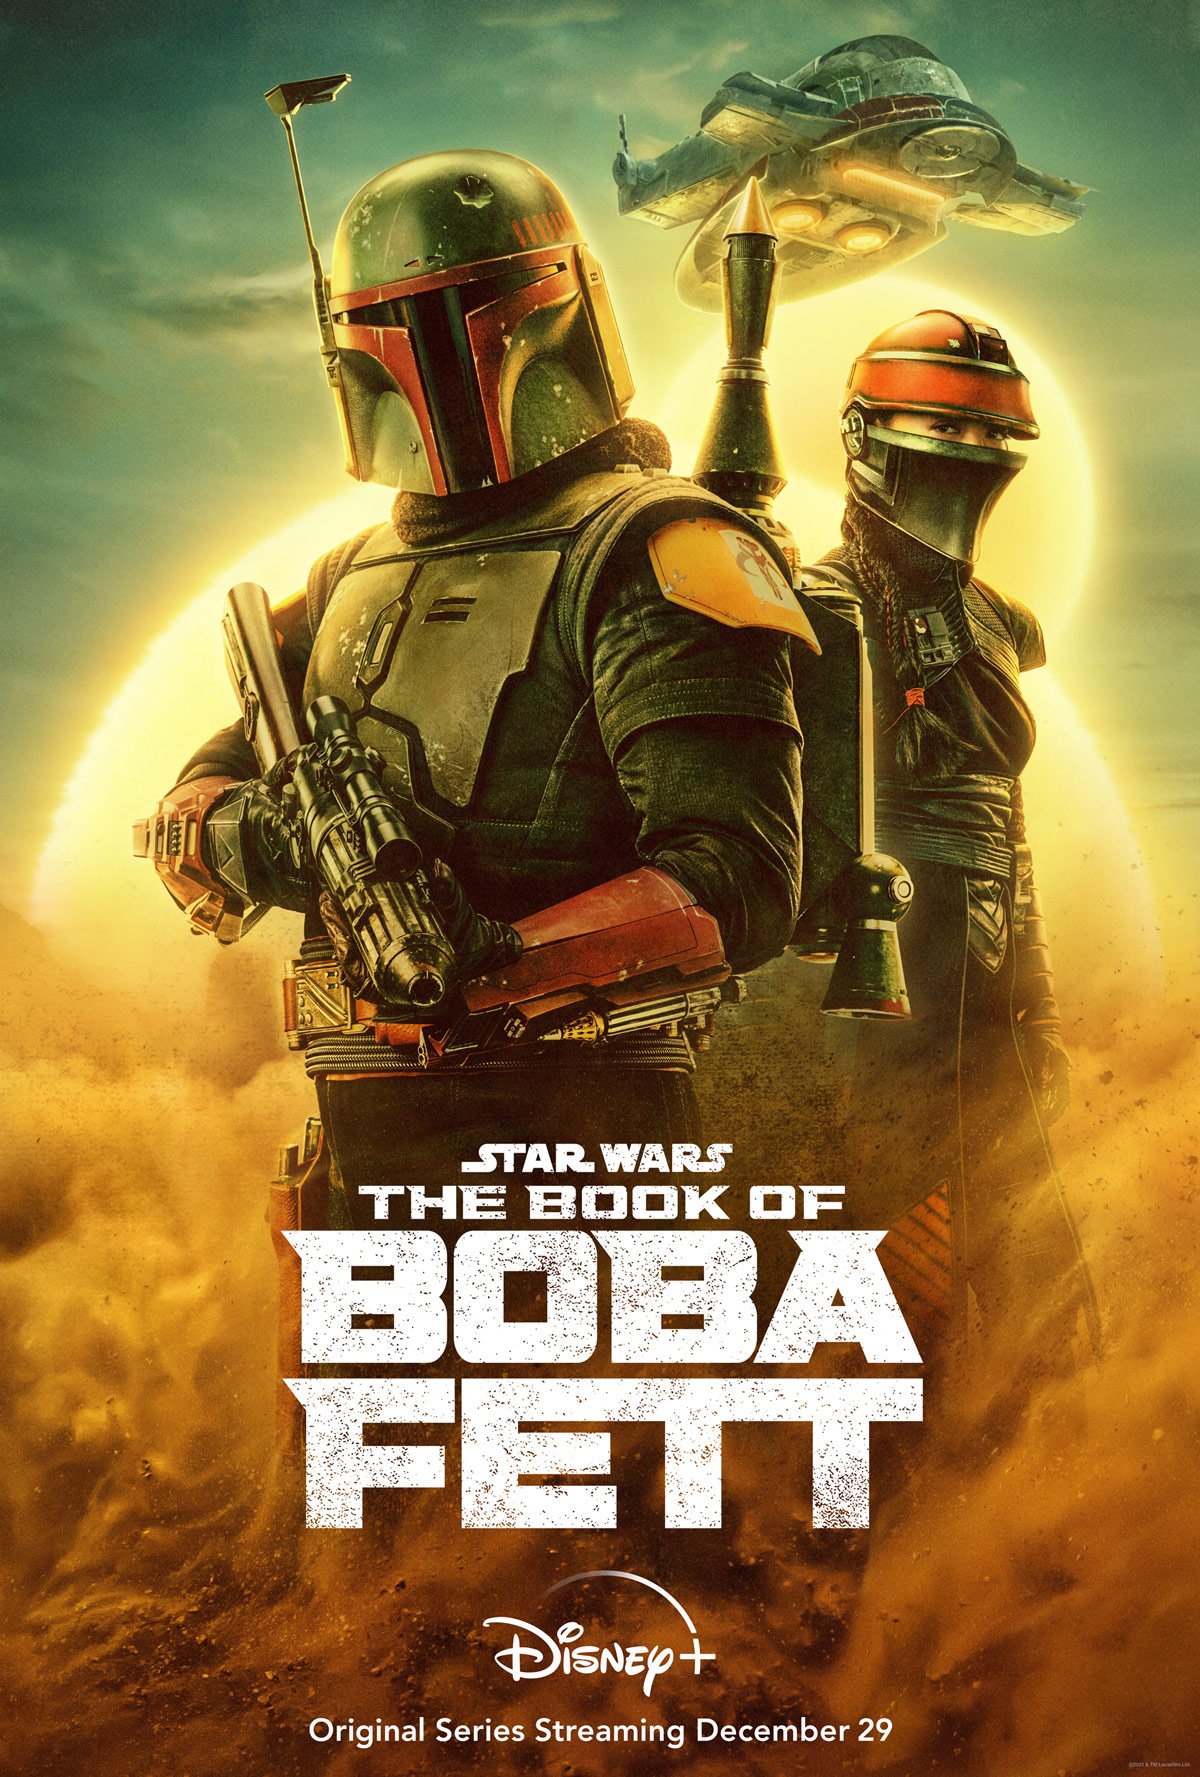 Highlights from The Book of Boba Fett